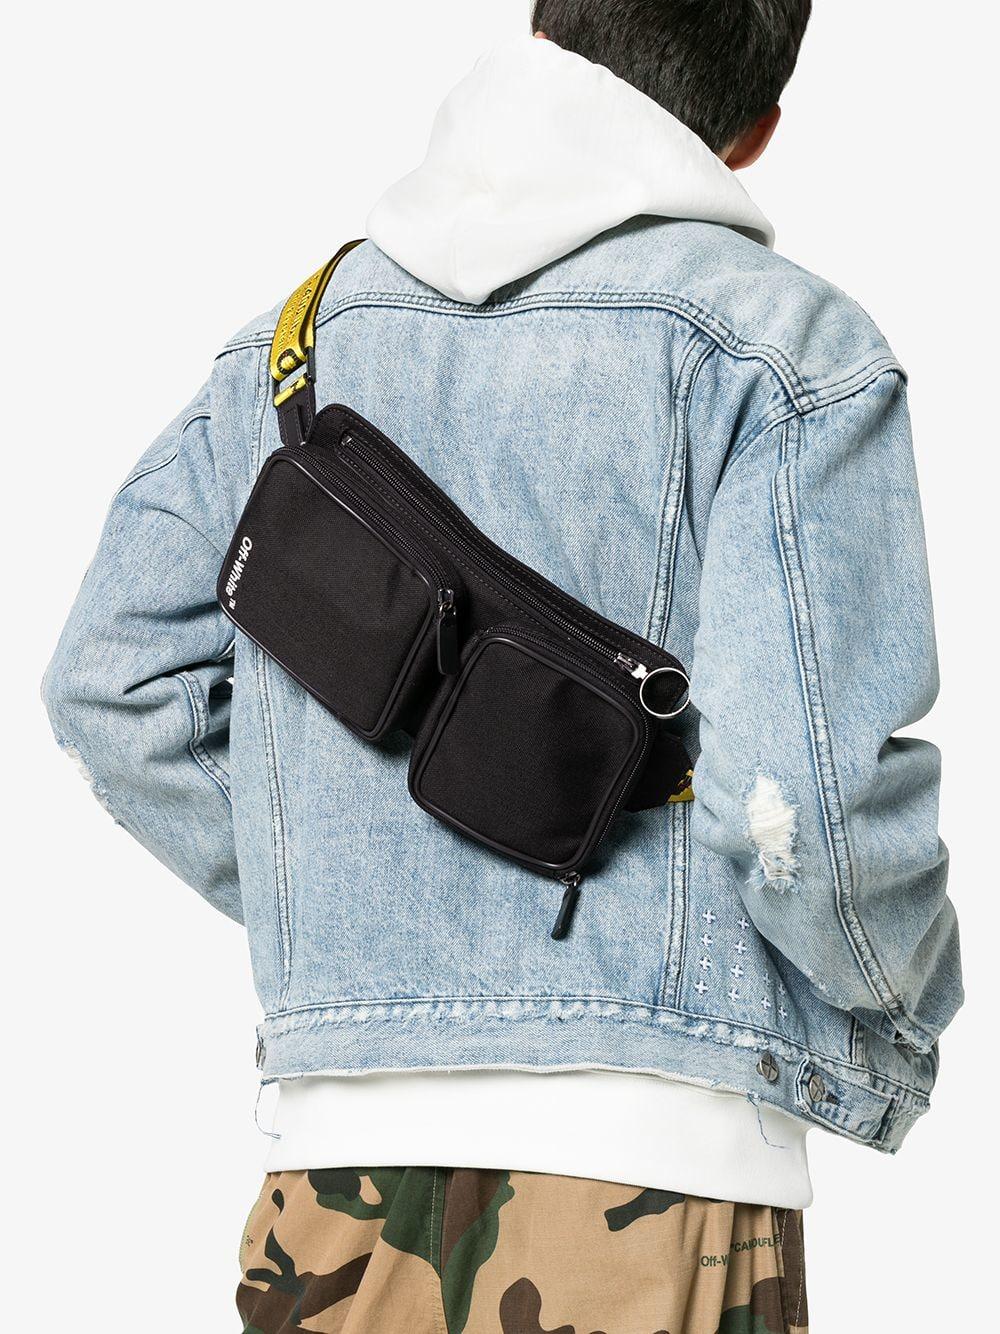 Off-White Shoulder Bags for Men - Shop Now on FARFETCH